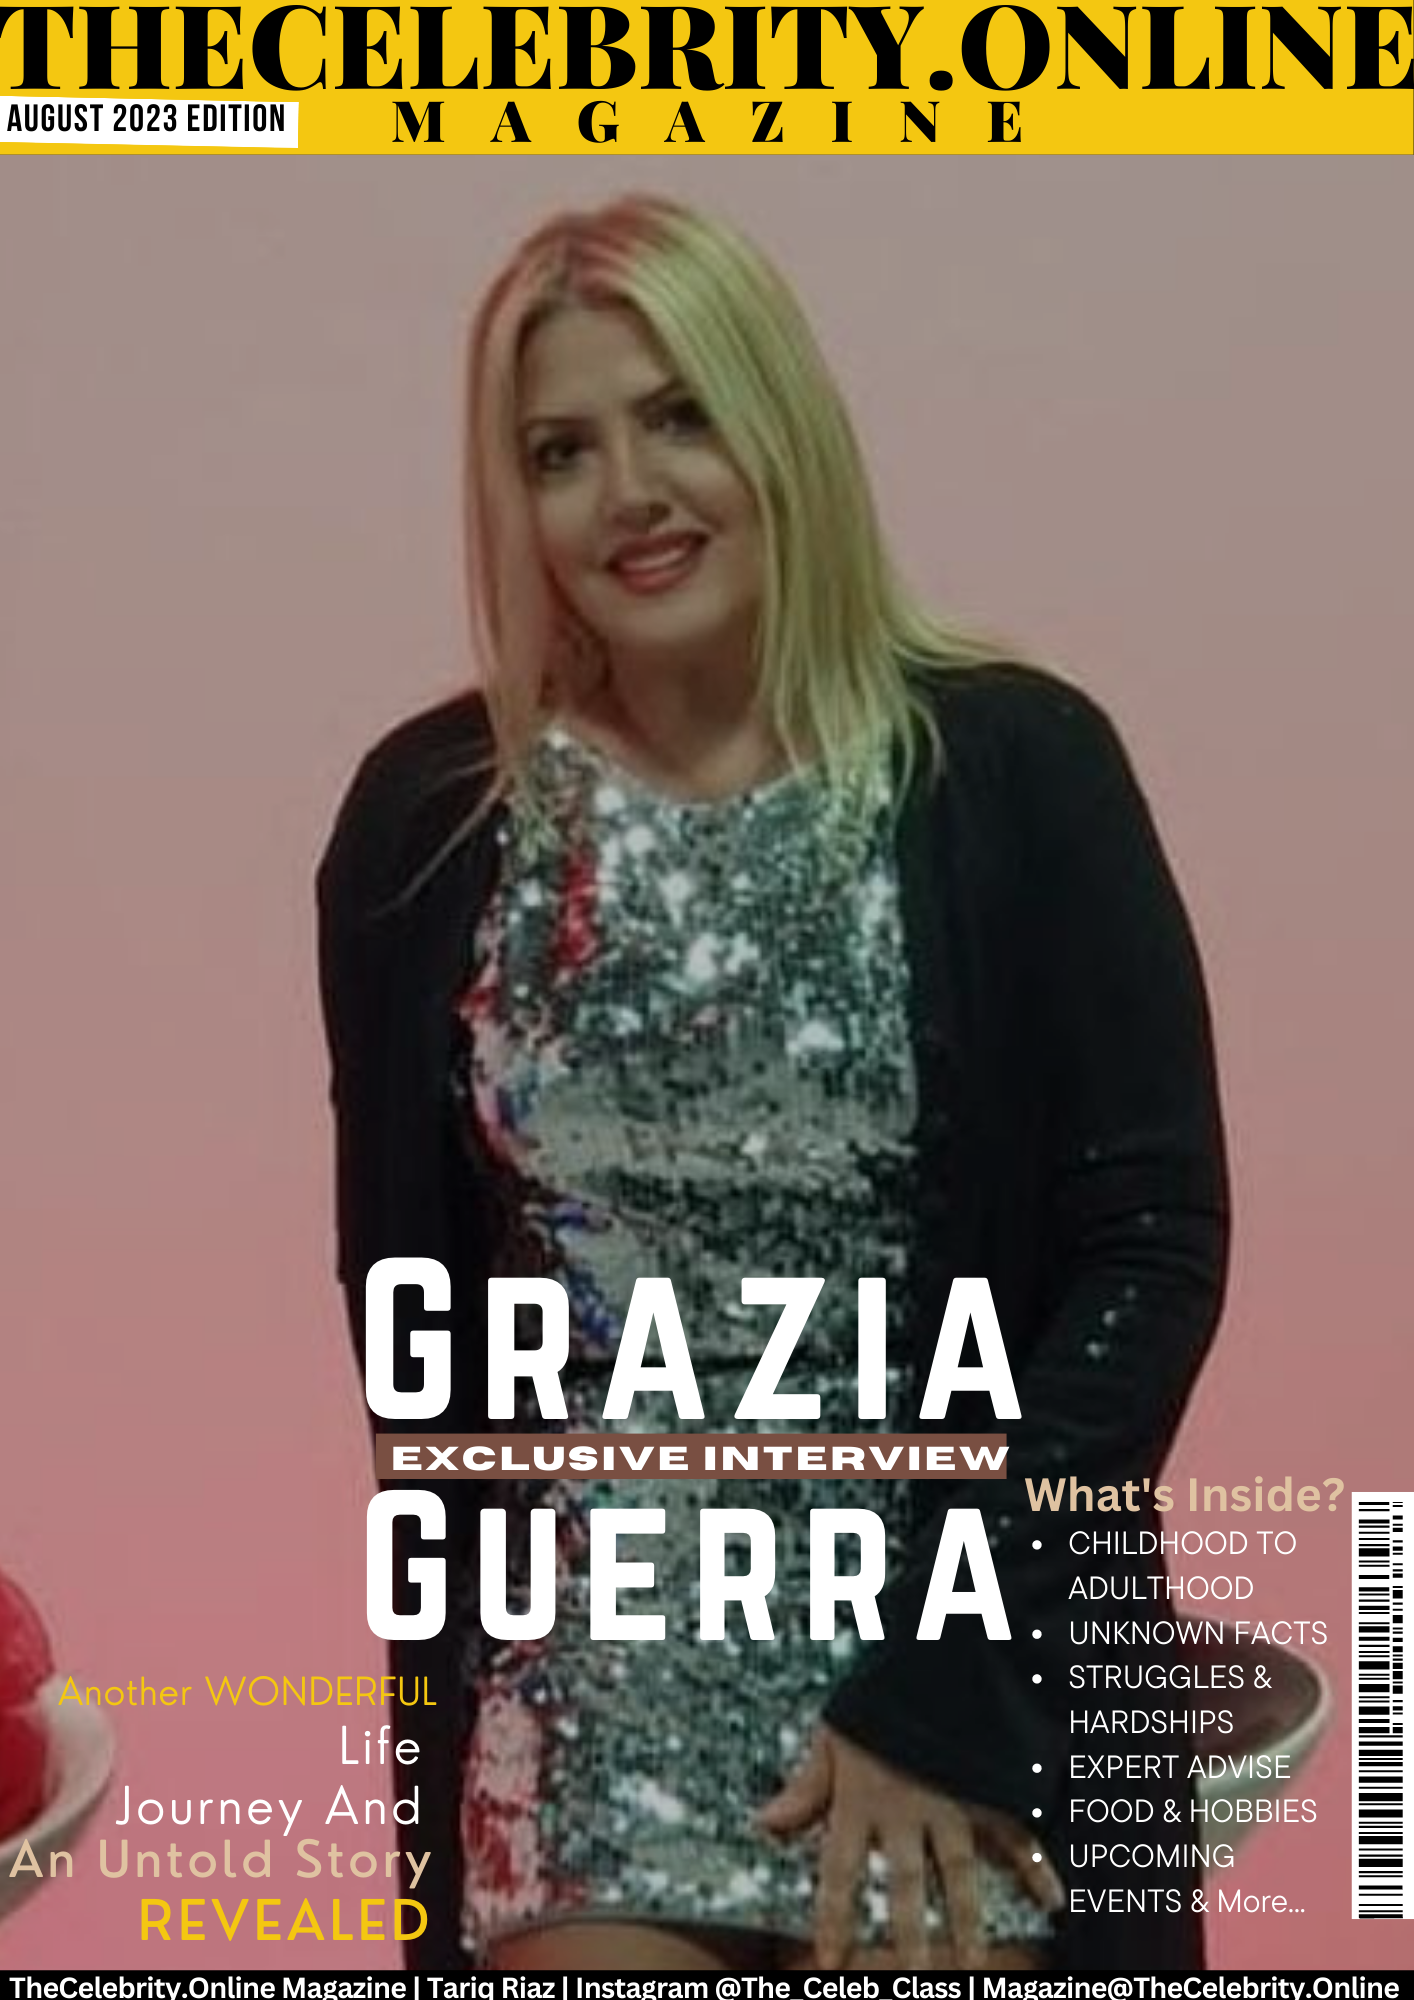 Grazia Guerra Exclusive Interview – ‘I Always Have A Goal Ready While The One In Progress’